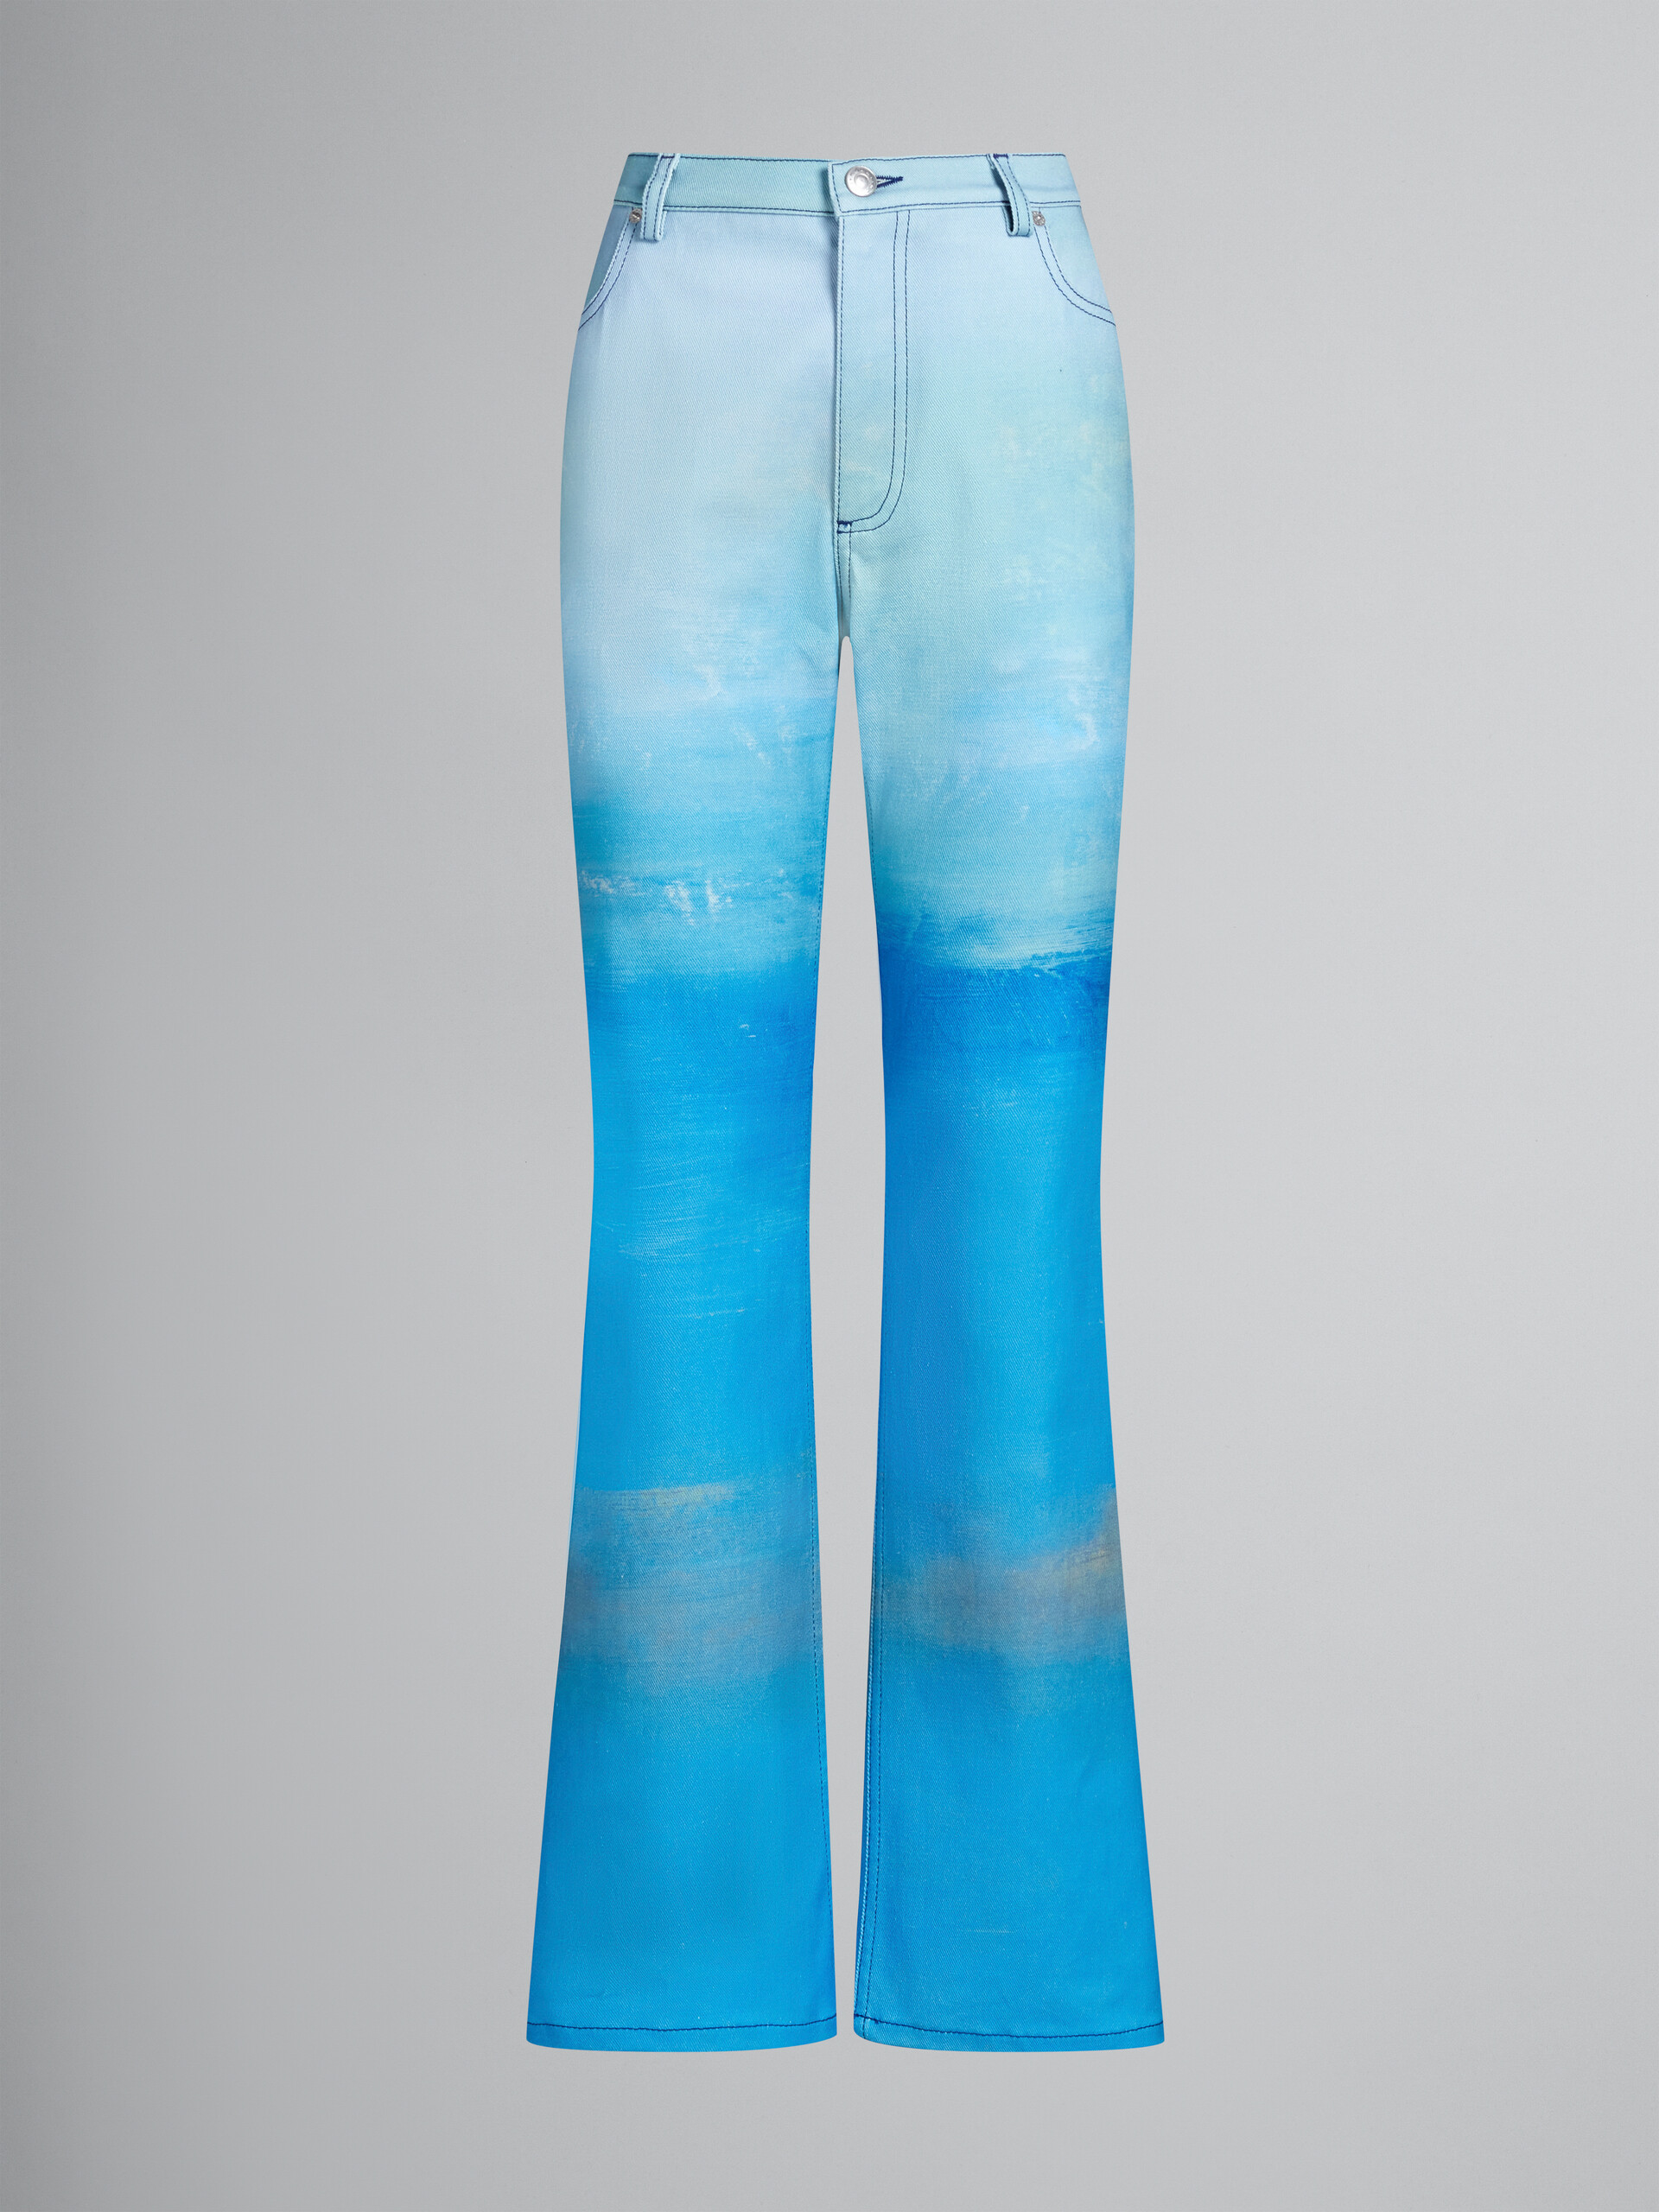 Blue denim trousers with Notte Giorno print - Pants - Image 1